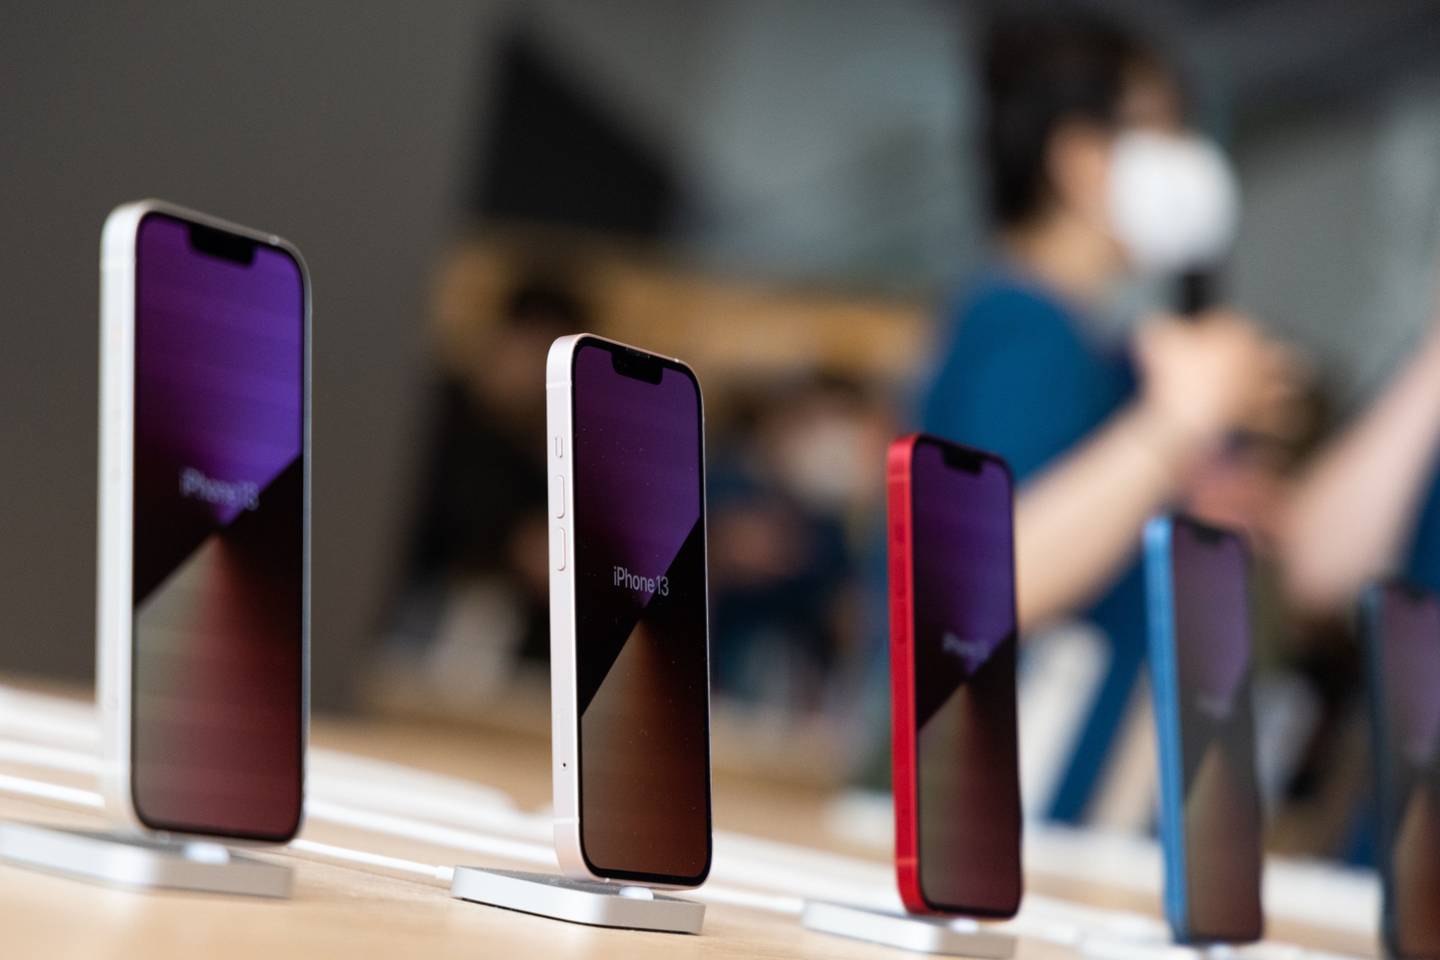 Apple Inc. iPhone 13 smartphones displayed at the company's Myeongdong store during its opening in Seoul, South Korea, on Saturday, April 9, 2022. The two-level store in the center of the city is Apple's third store in South Korea. Photographer: SeongJoon Cho/Bloomberg